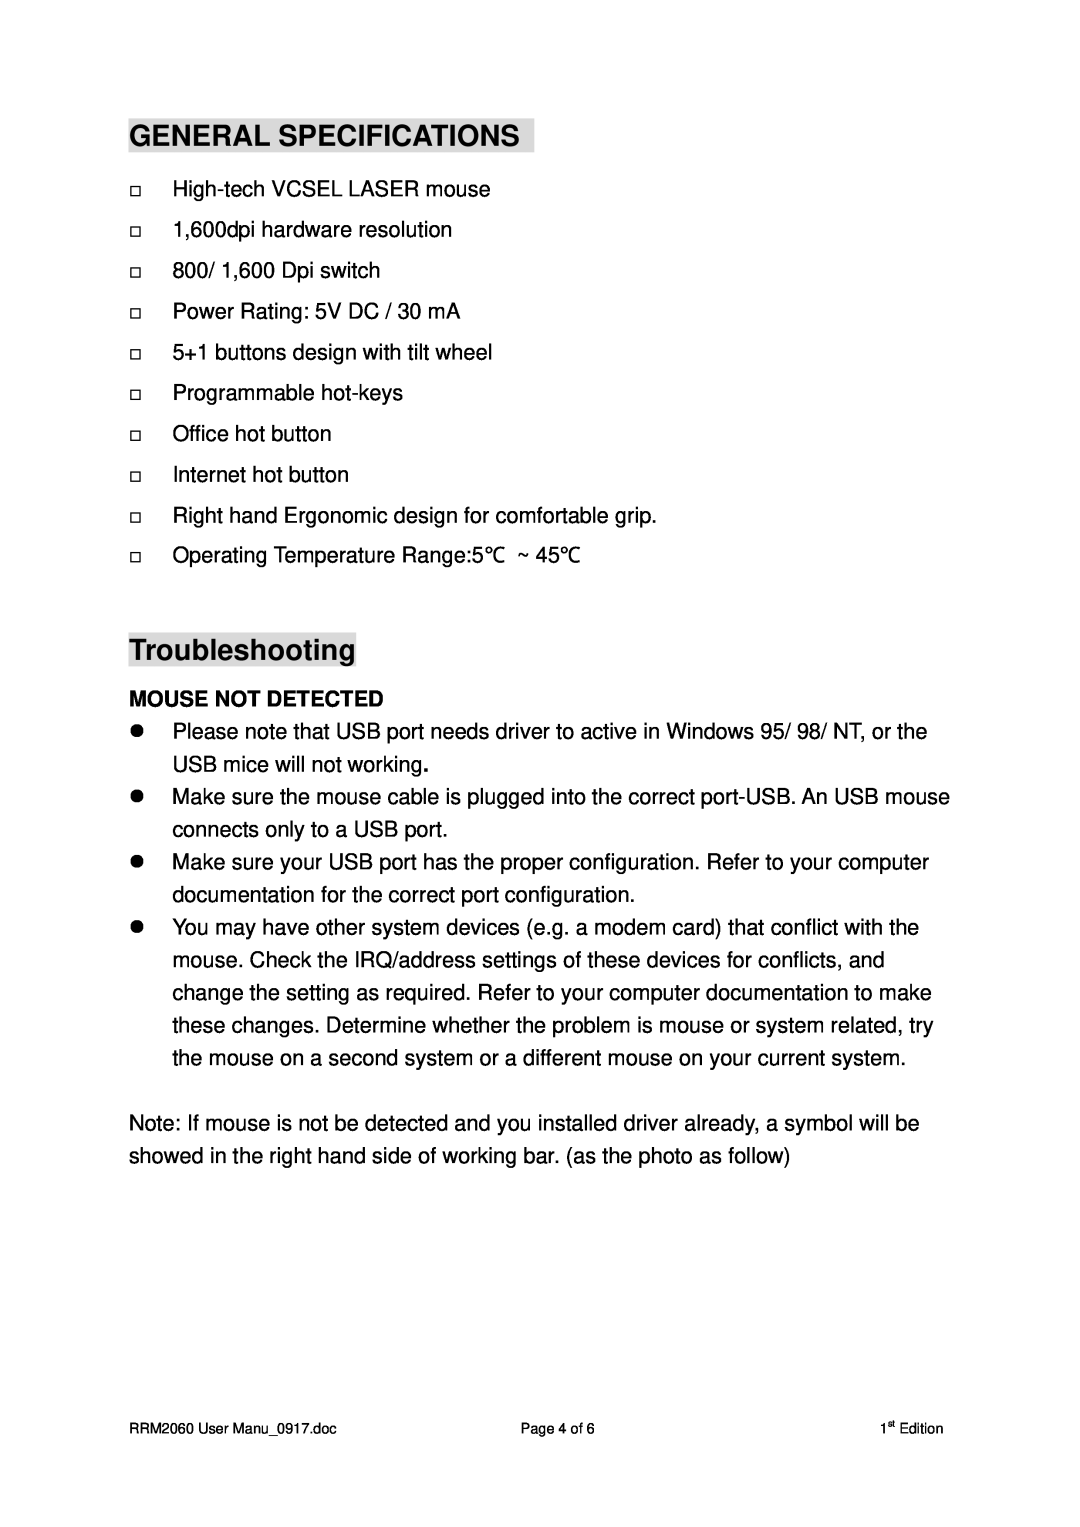 Rosewill RM2060 user manual General Specifications, Troubleshooting, Mouse Not Detected 